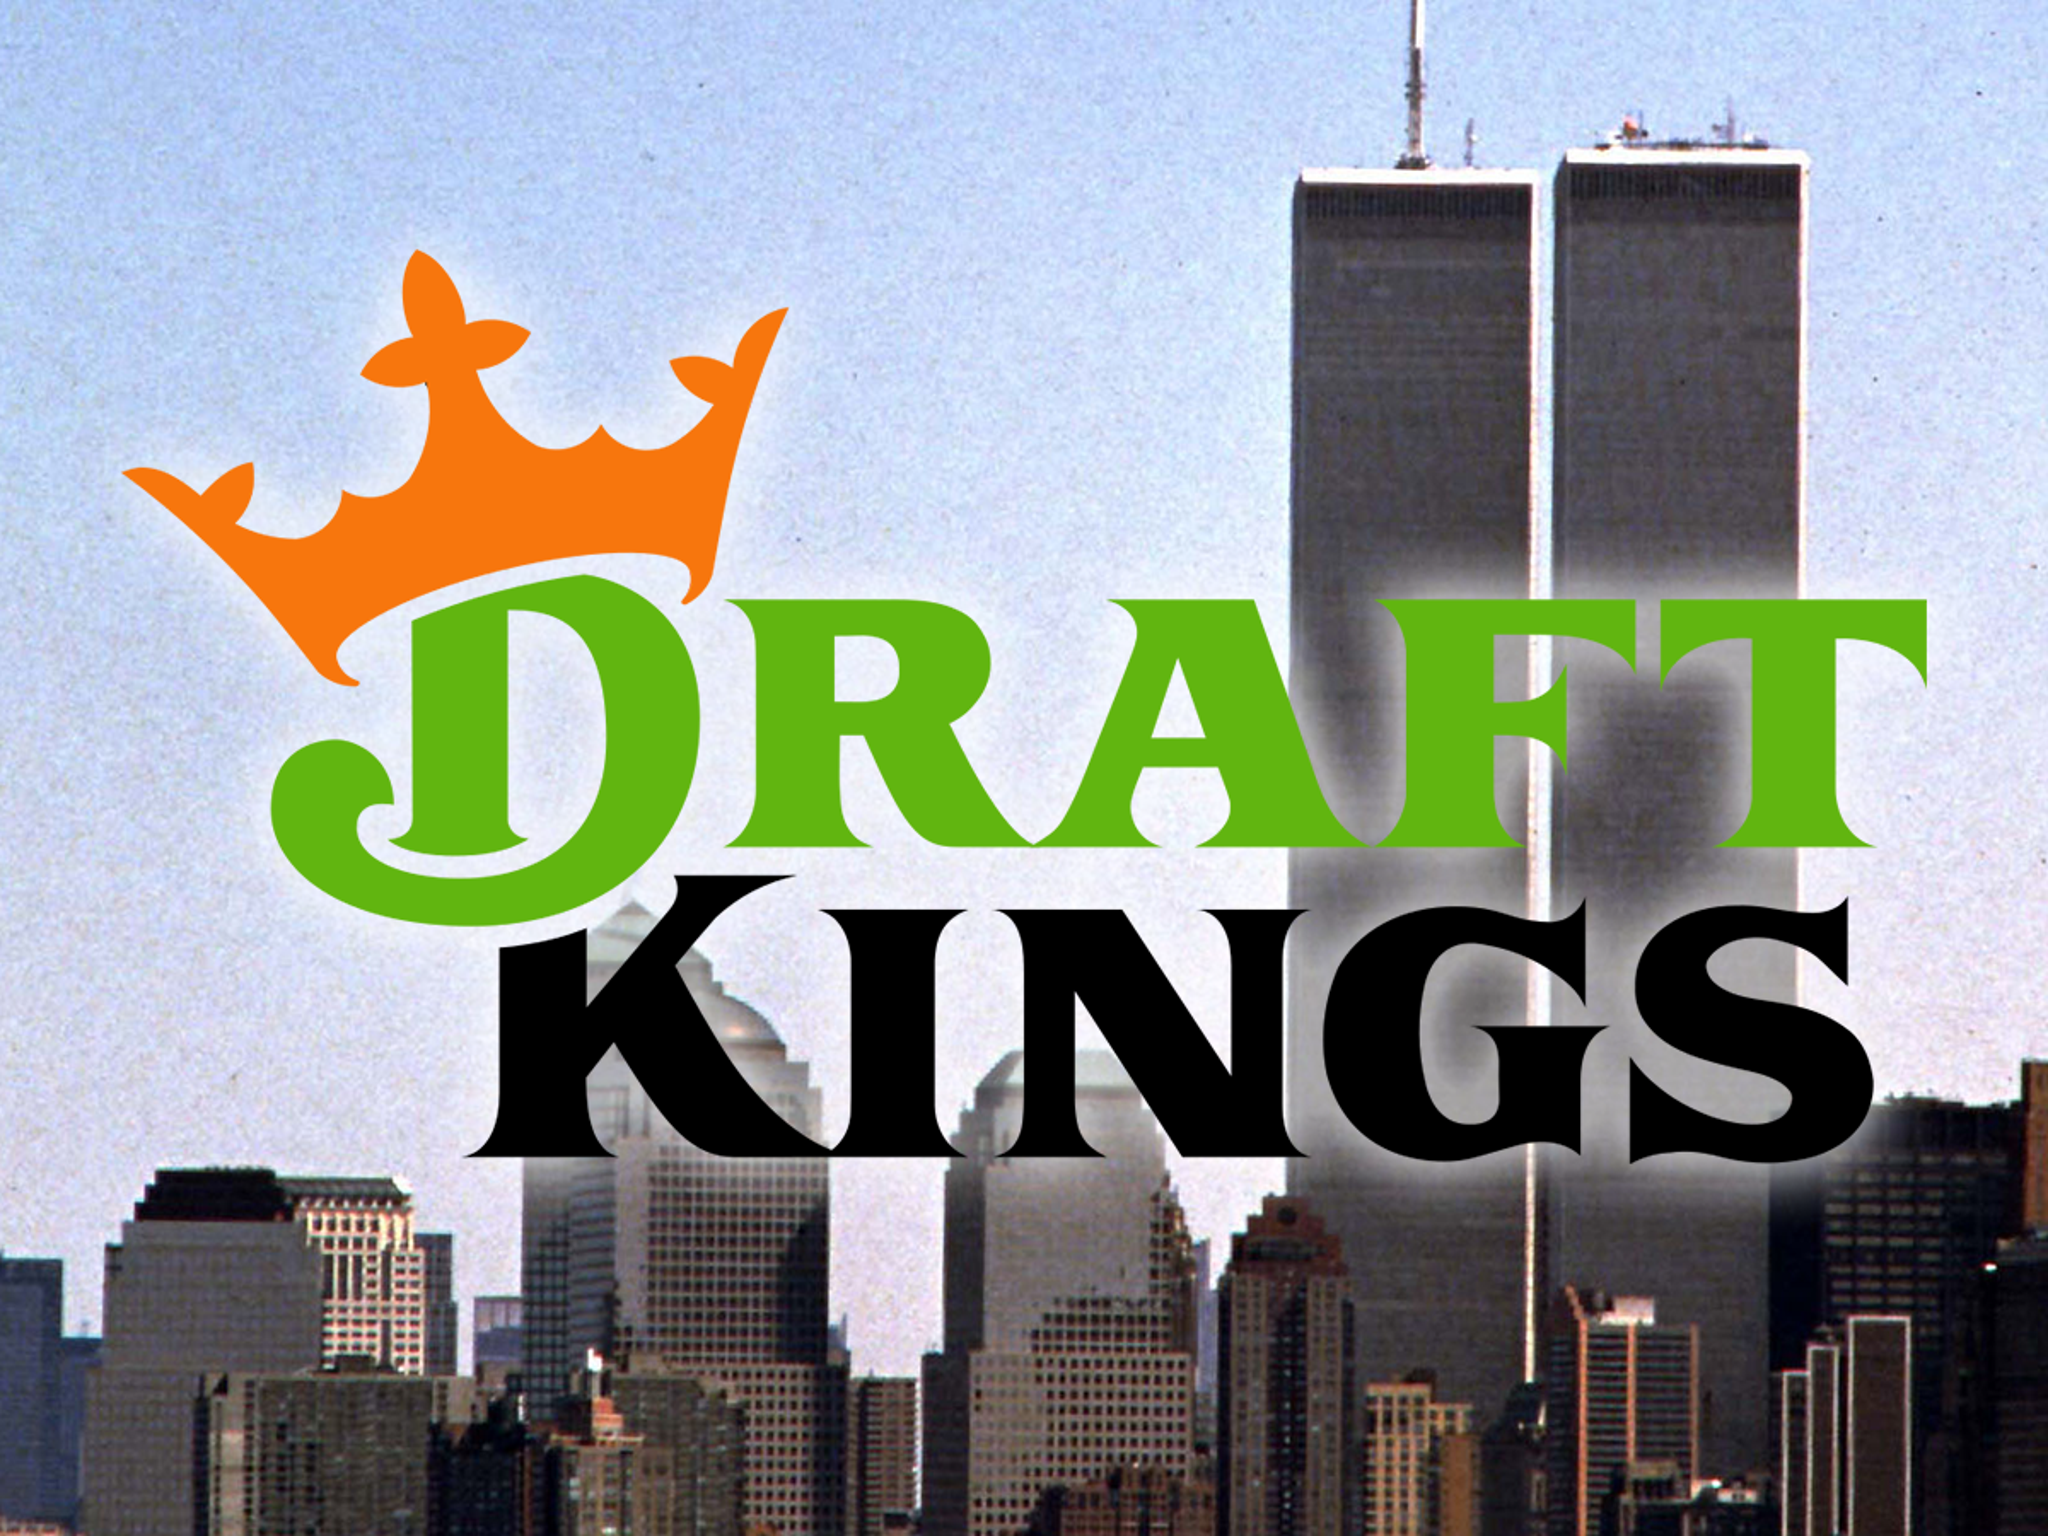 Jets: DraftKings forced to apologize for shocking 9/11 promotion